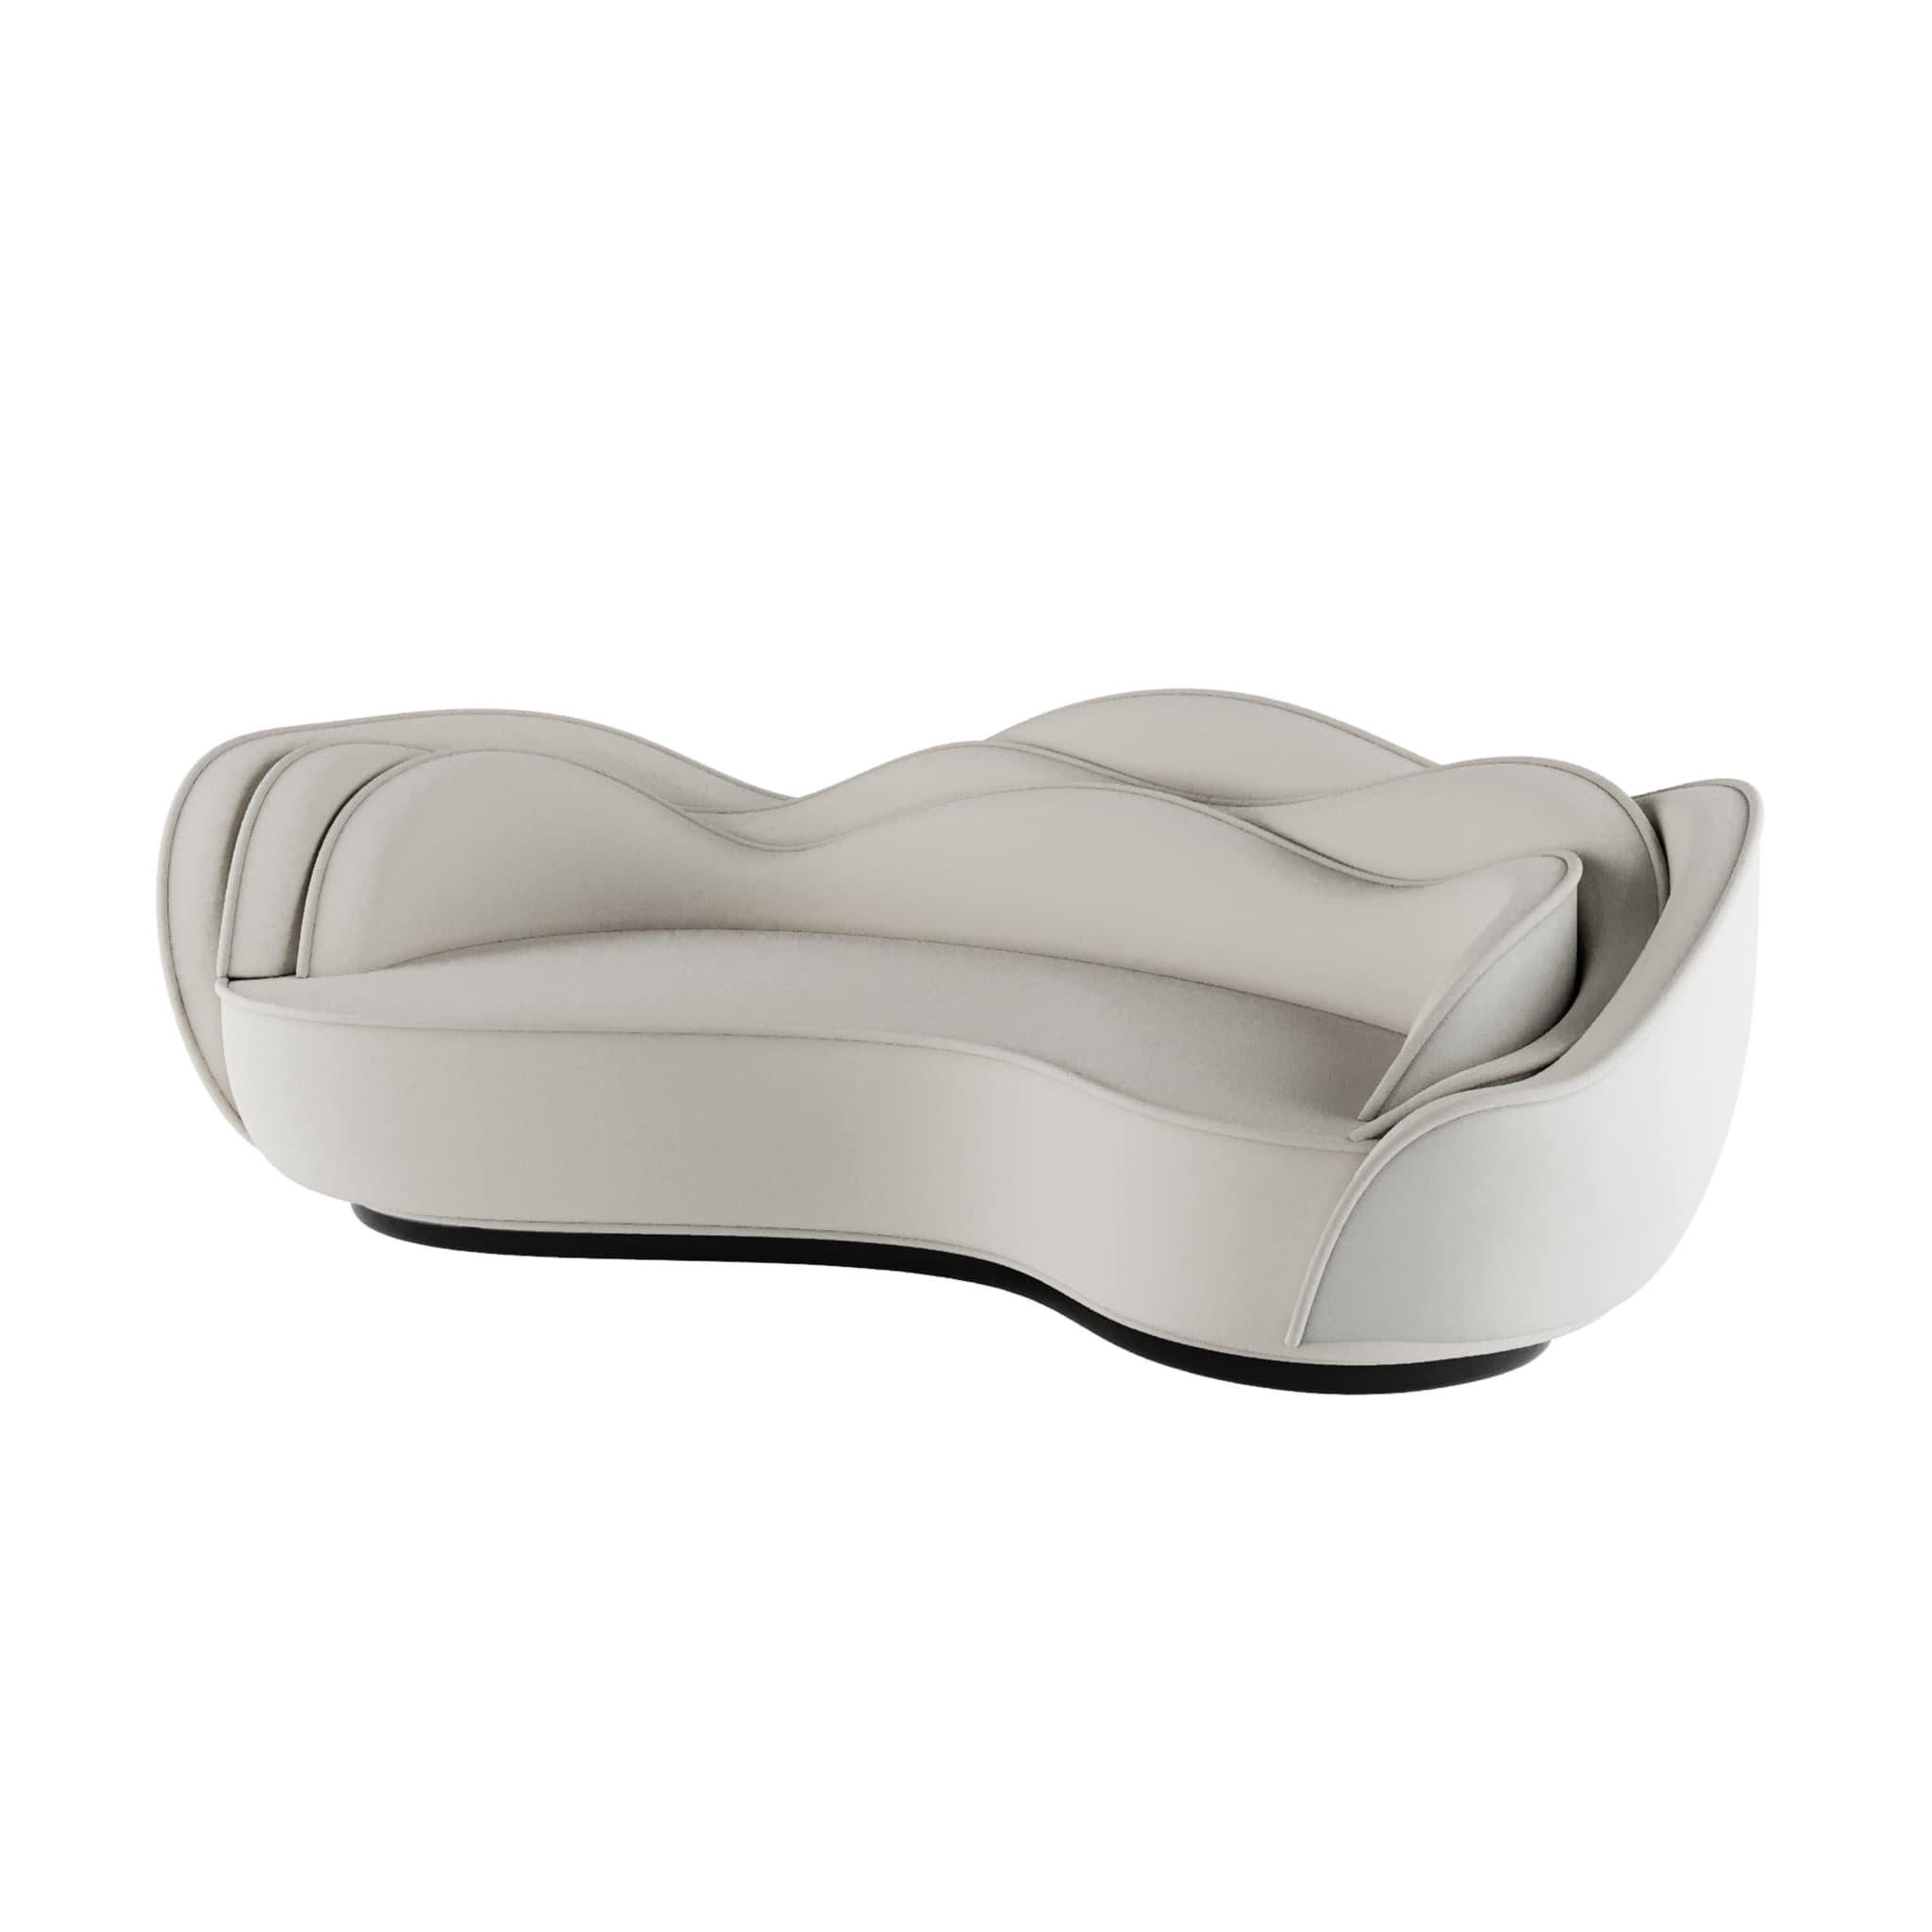 Cadiz Sofa is a postmodern style sofa with curvilinear shapes that makes a statement without renouncing comfort. The sofa sculpture has a wavy backrest that is a perfect abstraction of feminine beauty. The seat has an organic shape, designed for